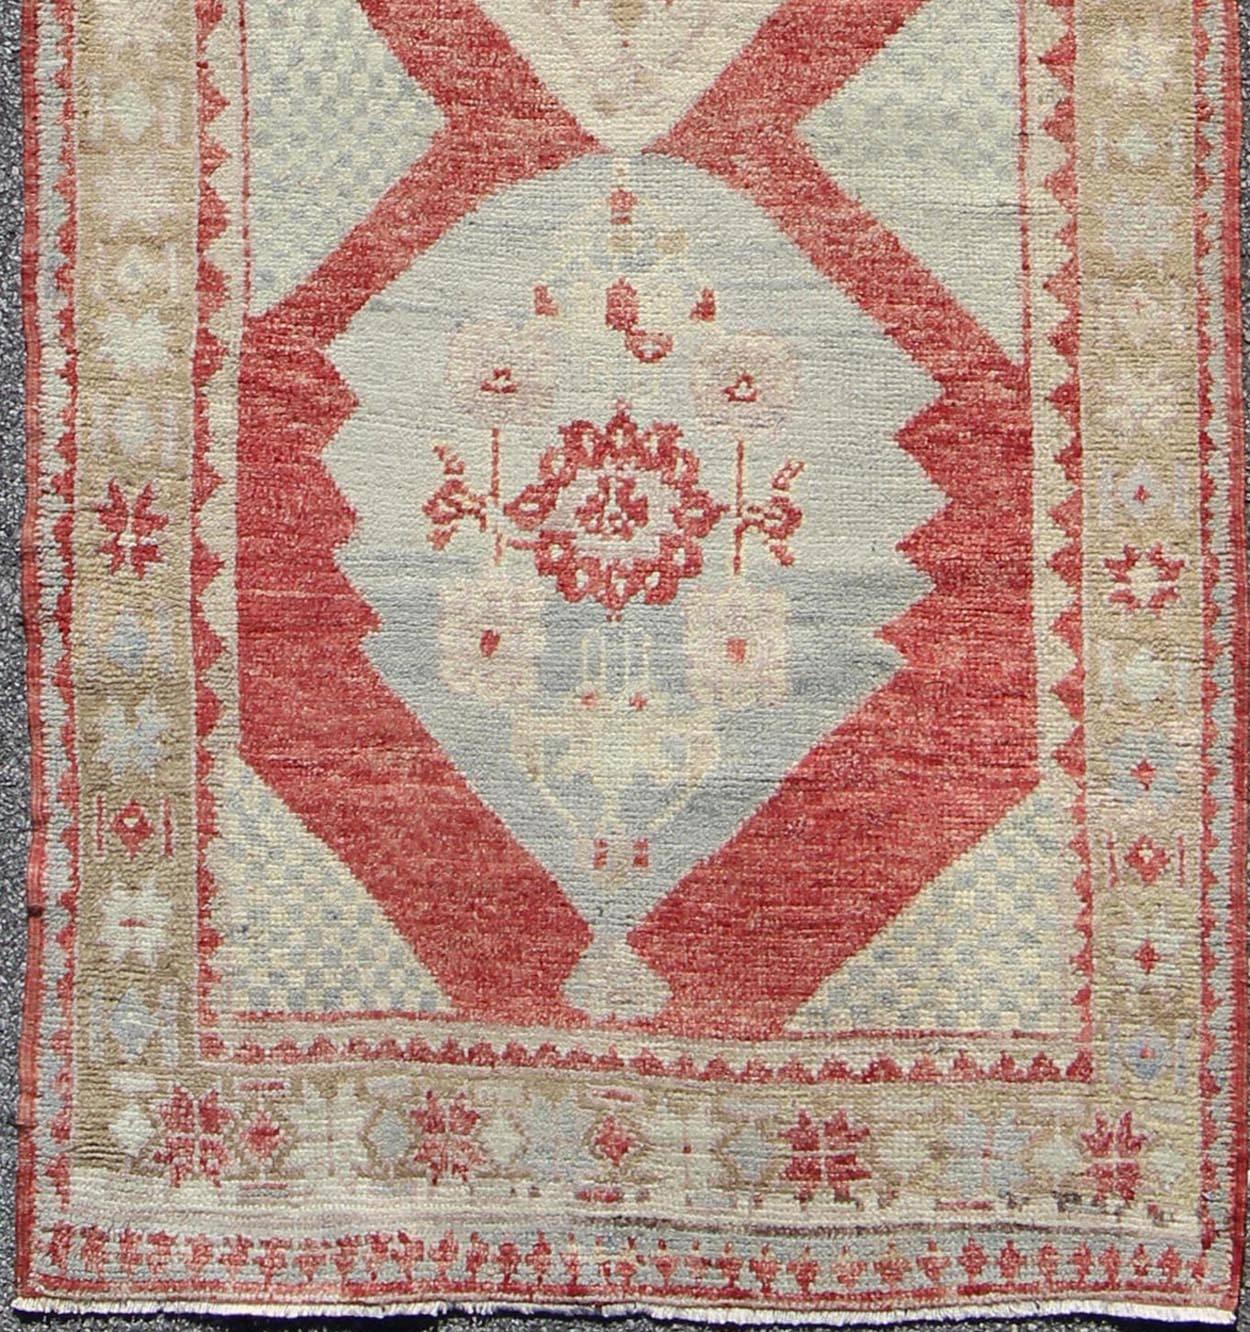 1930's Layered Medallion Vintage Turkish Oushak Runner in soft Red, Lt. Blue, Cream, rug TU-UGU-3601, country of origin / type: Turkey / Oushak, circa mid-20th Century.  

Measures: 3'8'' x 9'7''

This beautiful vintage Oushak runner from 1930s